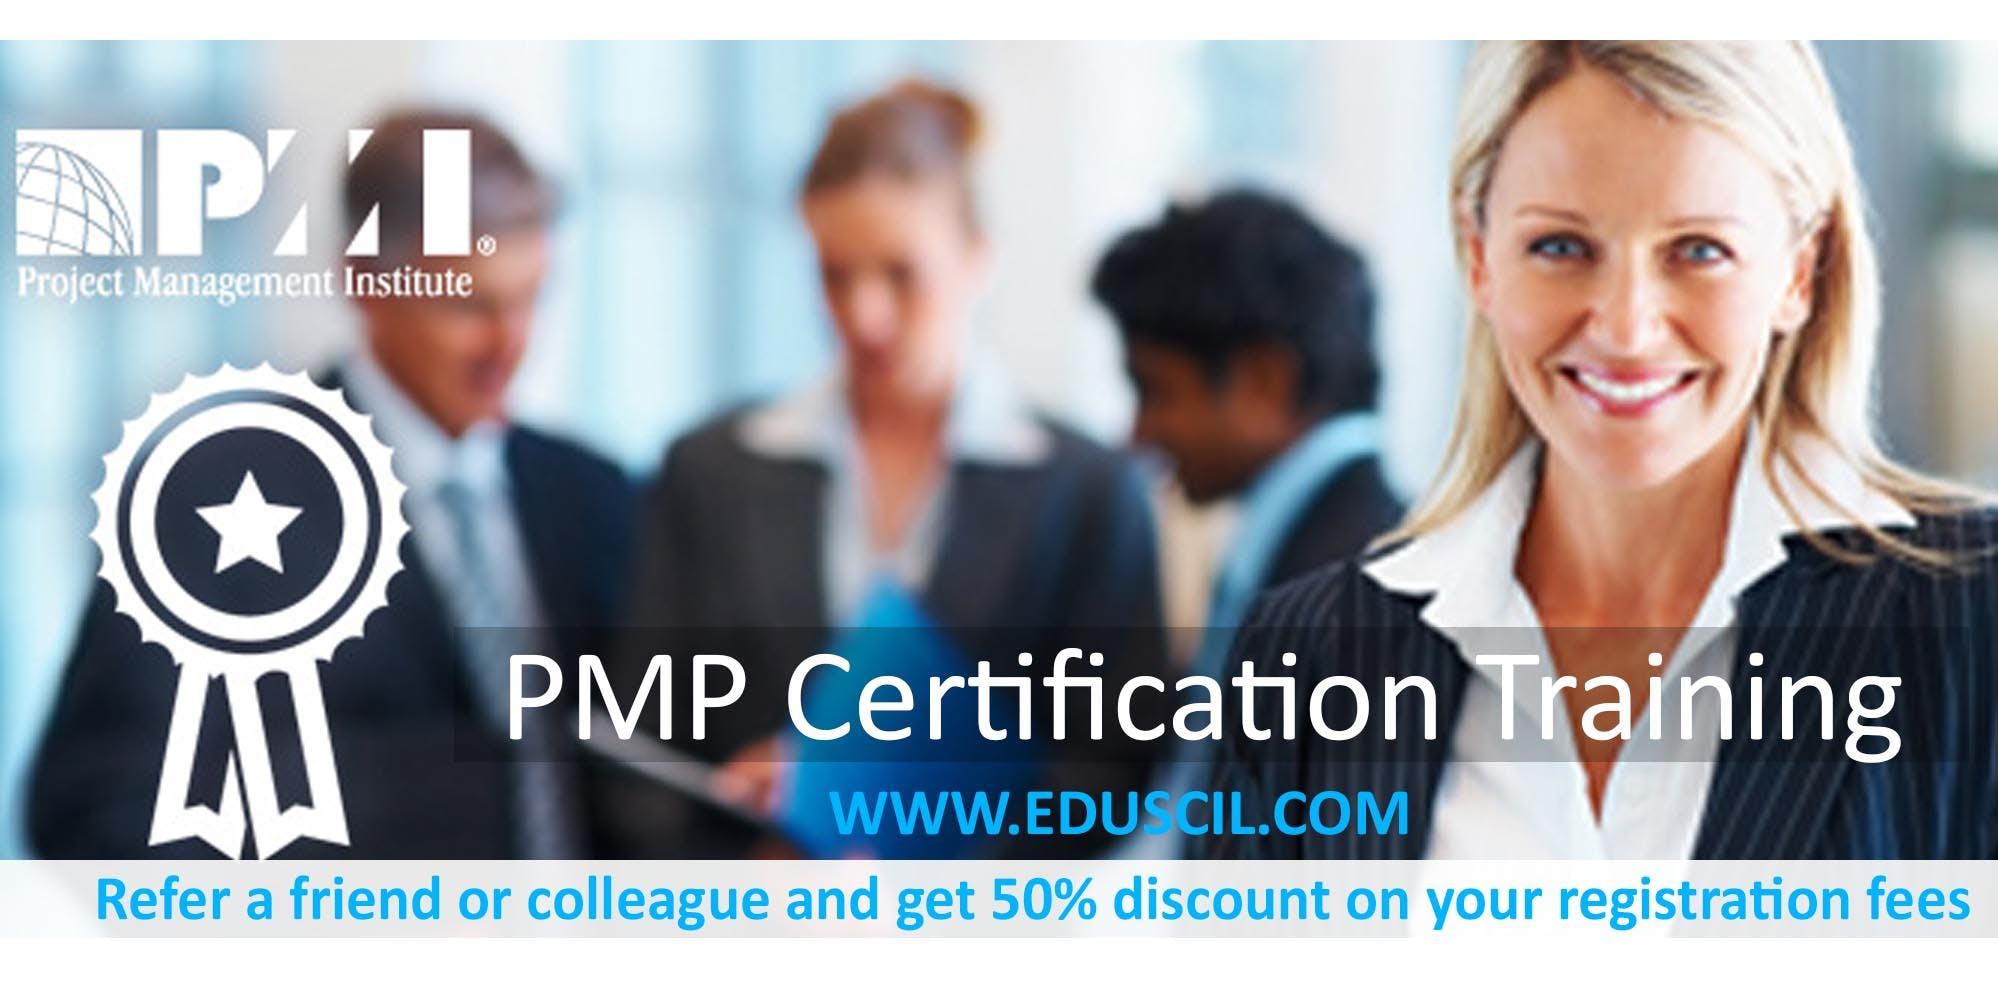 Project Management Professional (PMP) Boot Camp in Overland Park, KS-USA|Eduscil